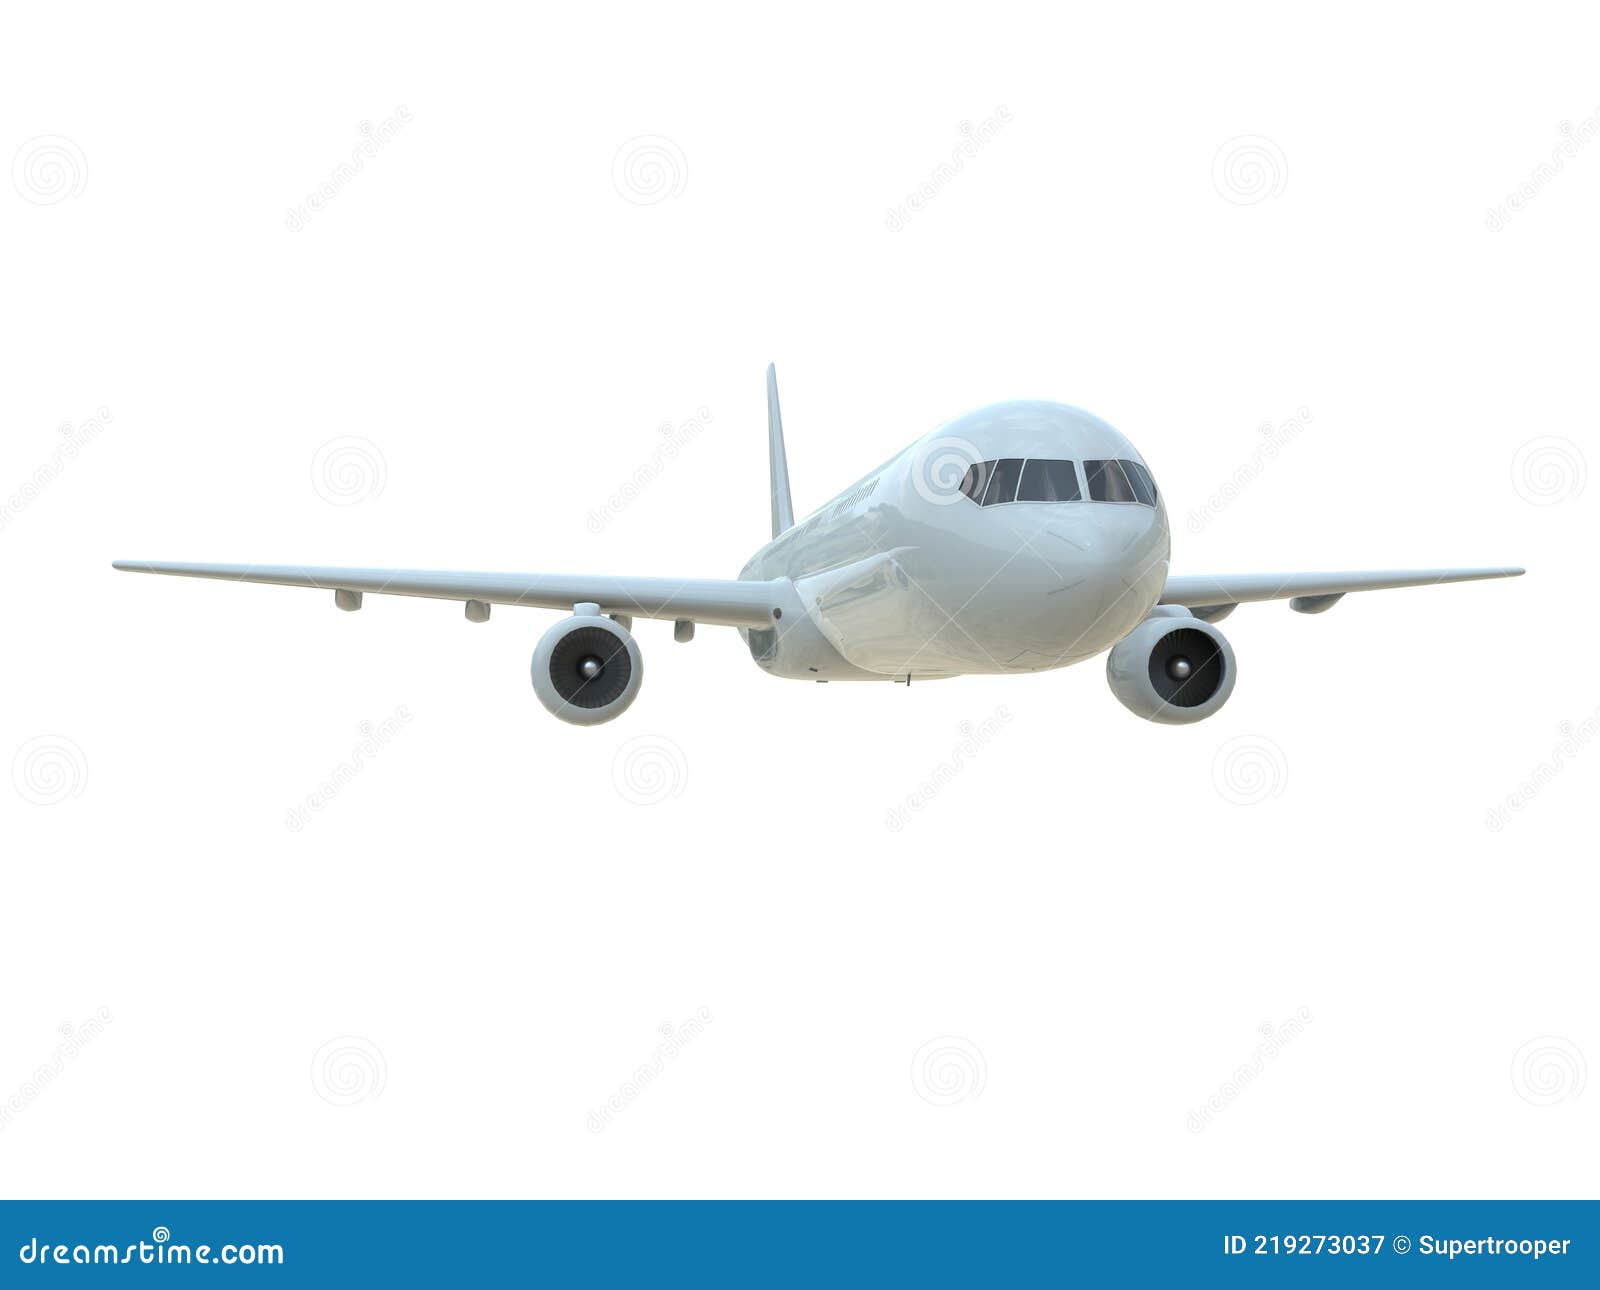 CommercialÂ Passenger Plane in AirÂ on White Aviation Cargo Service. CommercialÂ Passenger Plane in AirÂ on White, VacationÂ Travel by Air Transport,Â AirlinerÂ Take OffÂ Flying,Â Aircraft Flight andÂ AviationÂ RouteÂ Airline Sign, Aviation Cargo ServiceÂ 3d Illustration